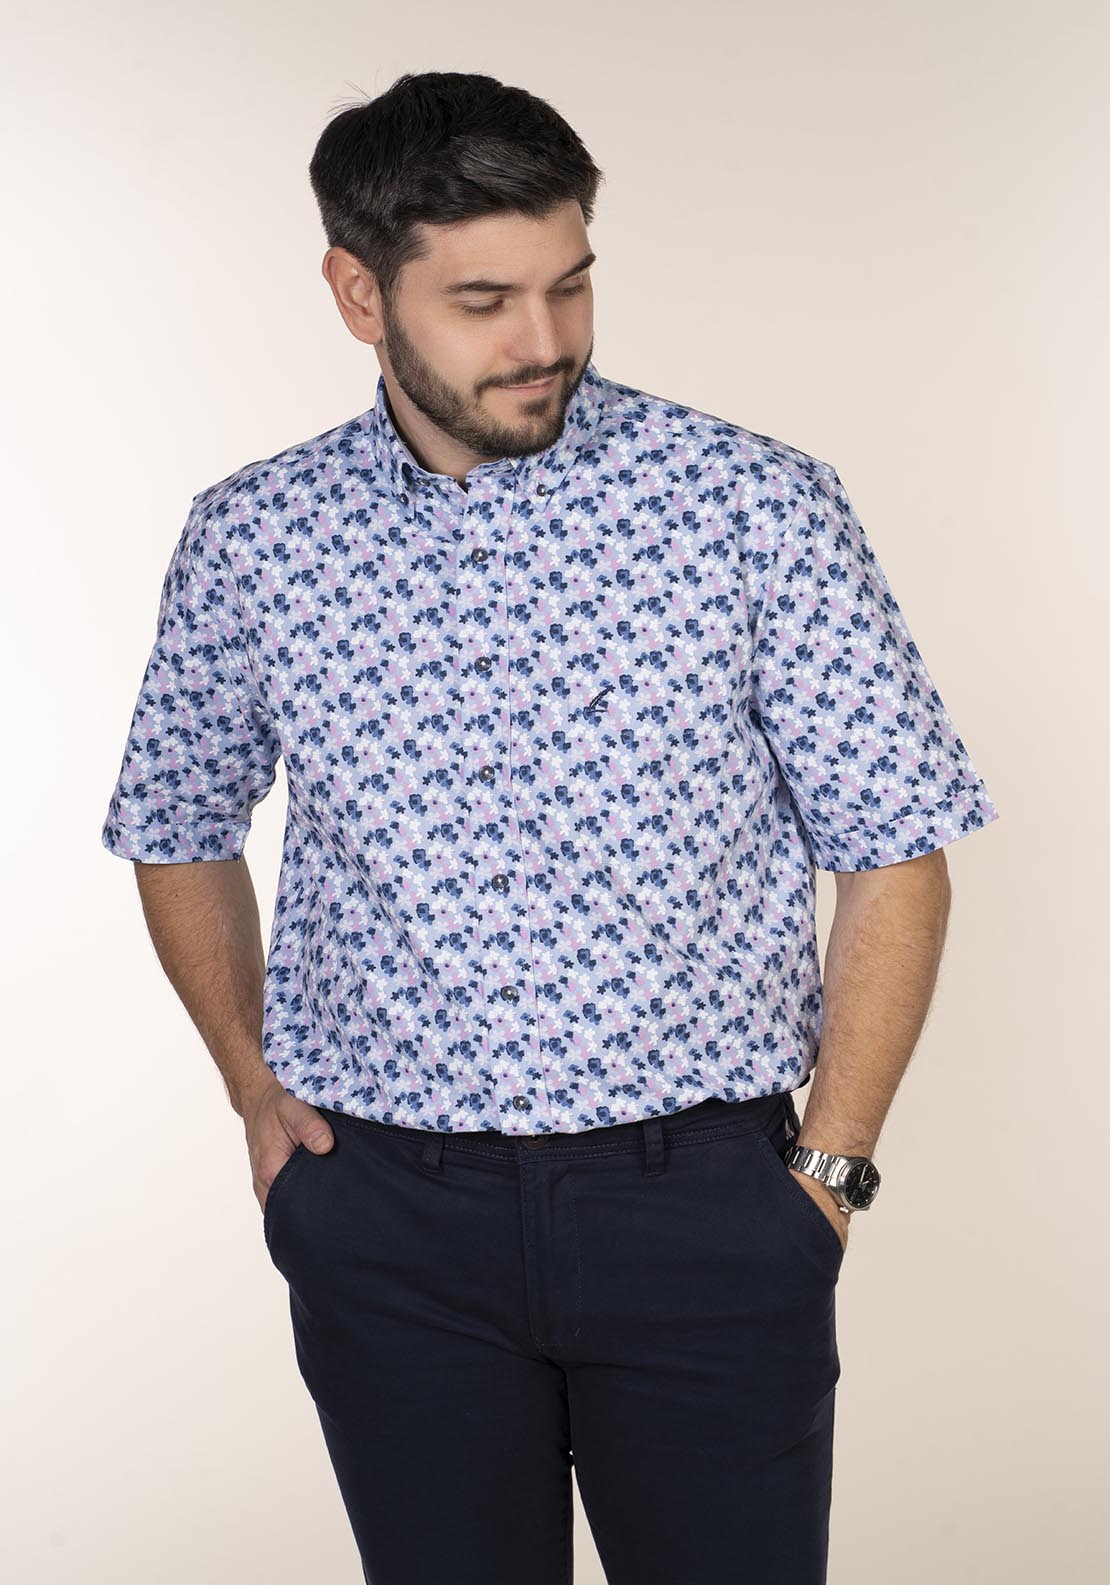 Yeats Casual Patterned Short Sleeve Shirt - Pink 3 Shaws Department Stores